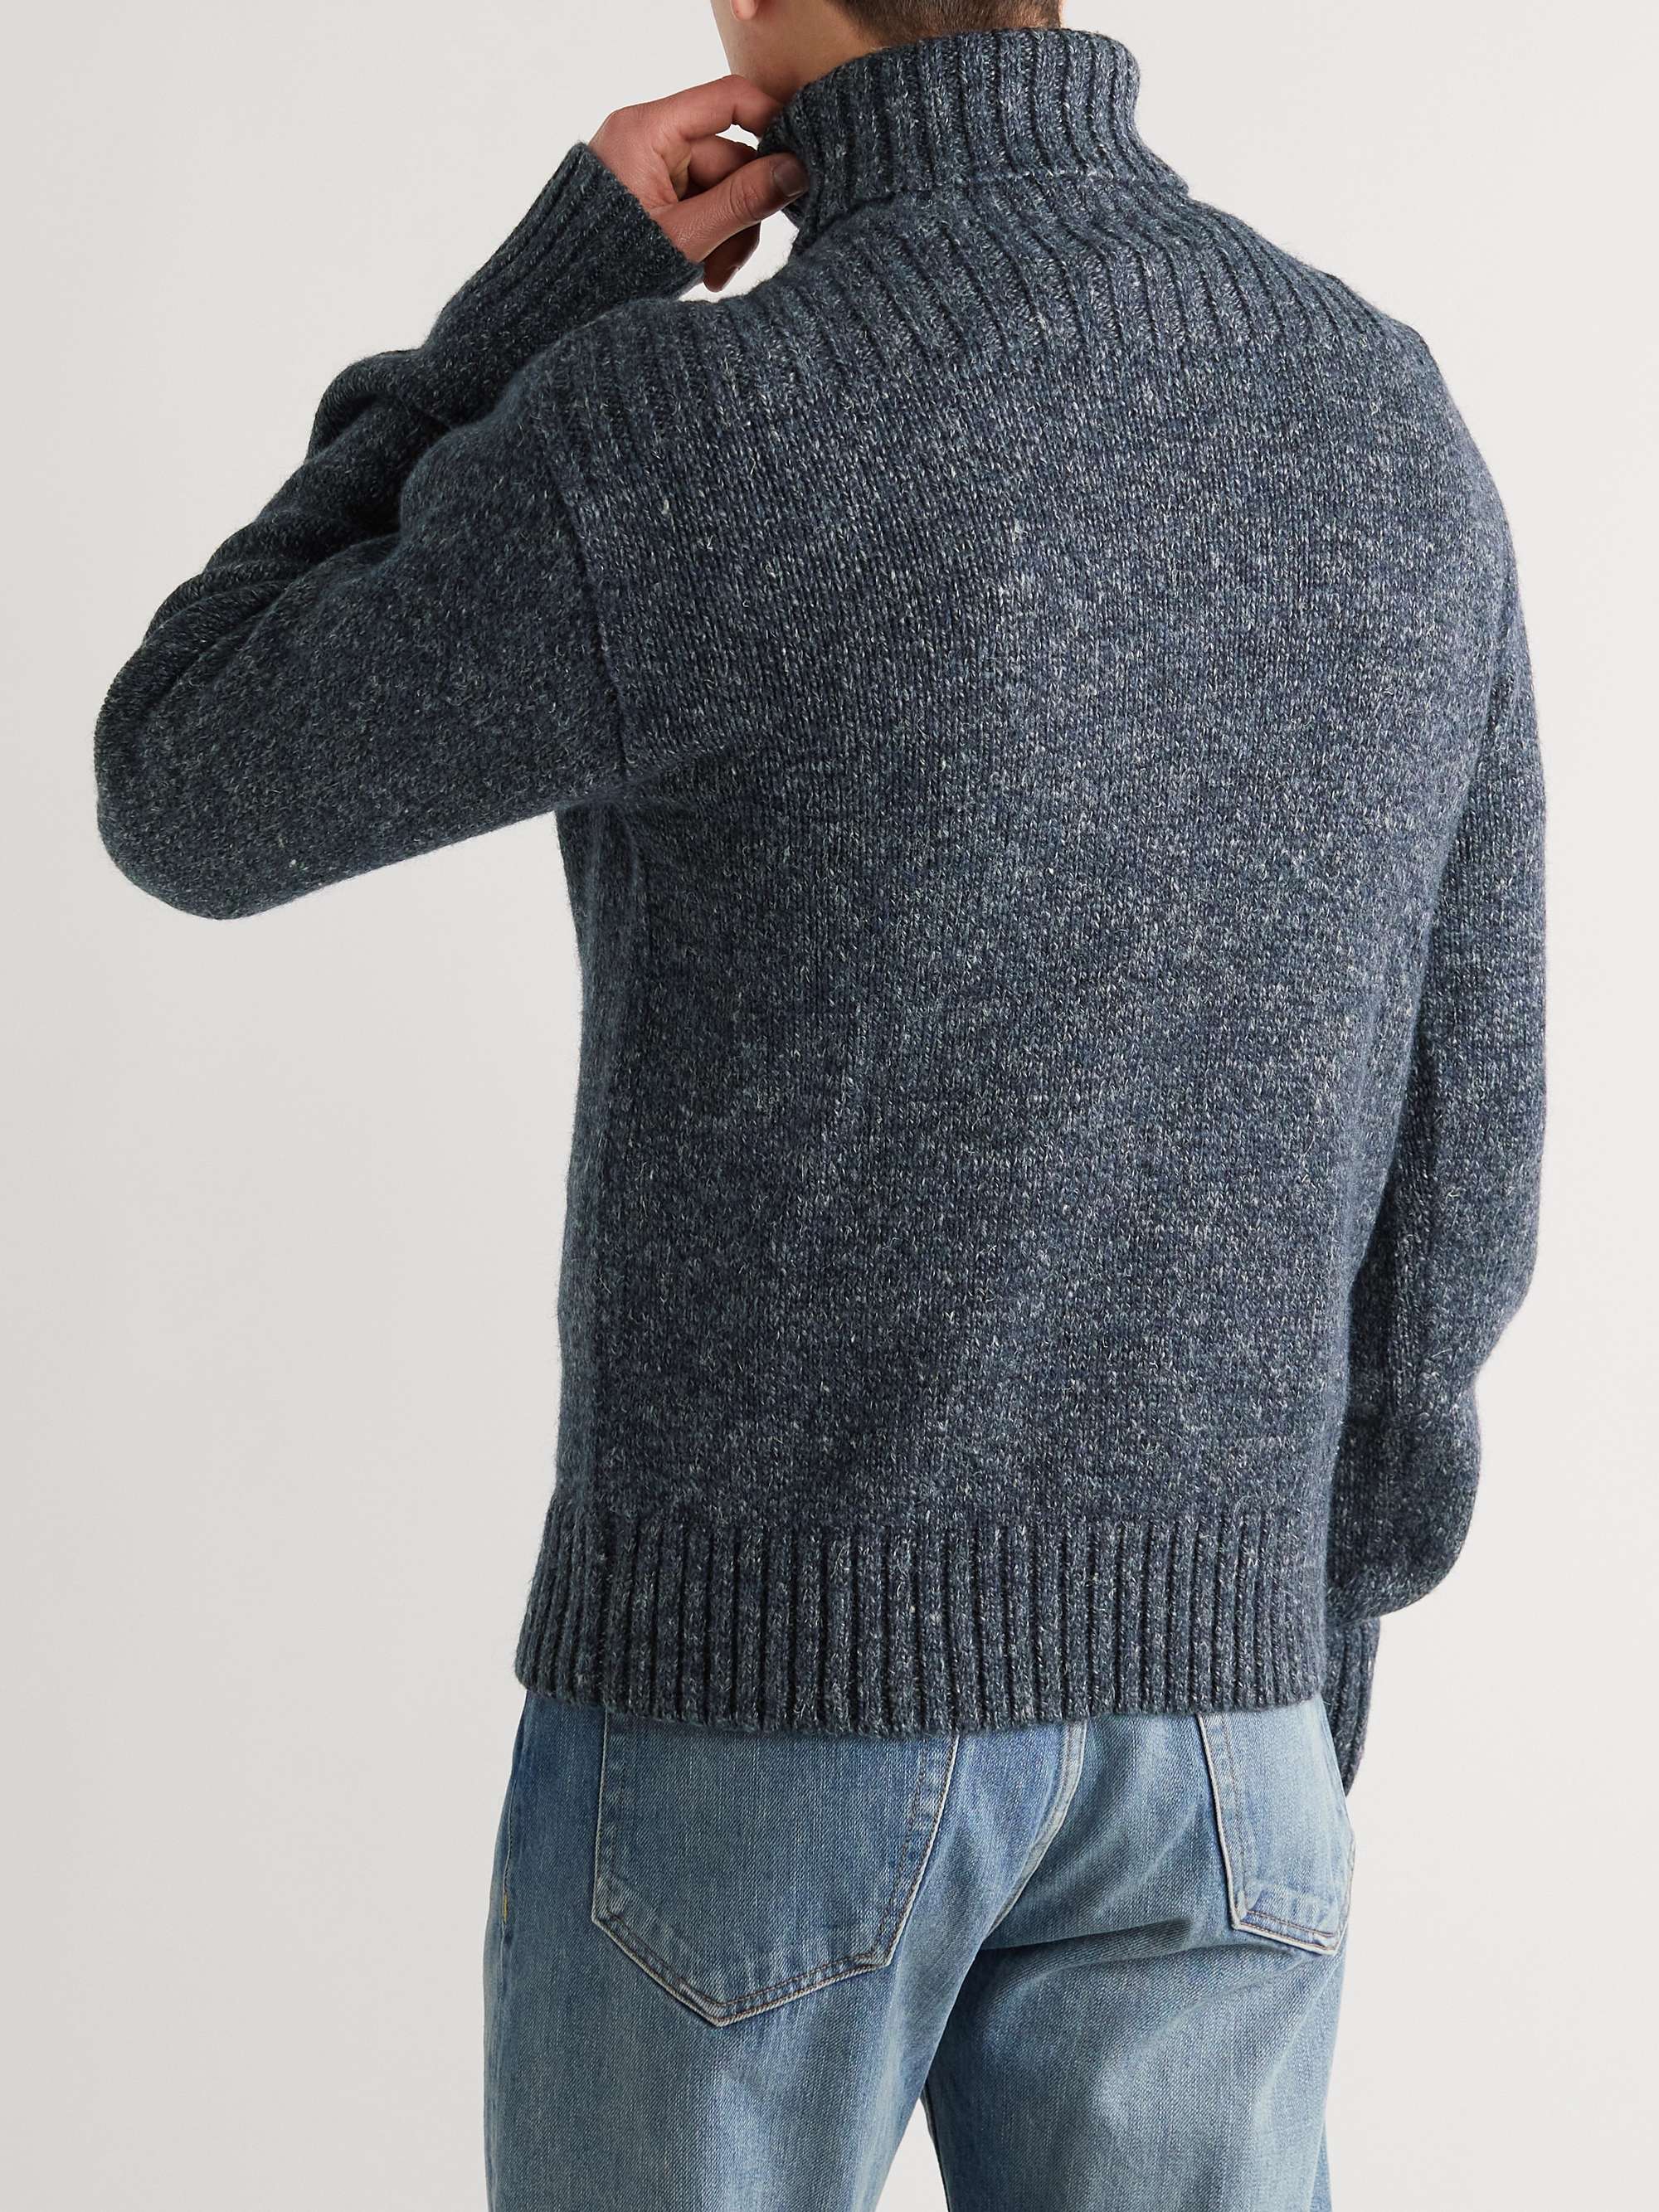 RRL Wool, Cotton and Linen-Blend Rollneck Sweater